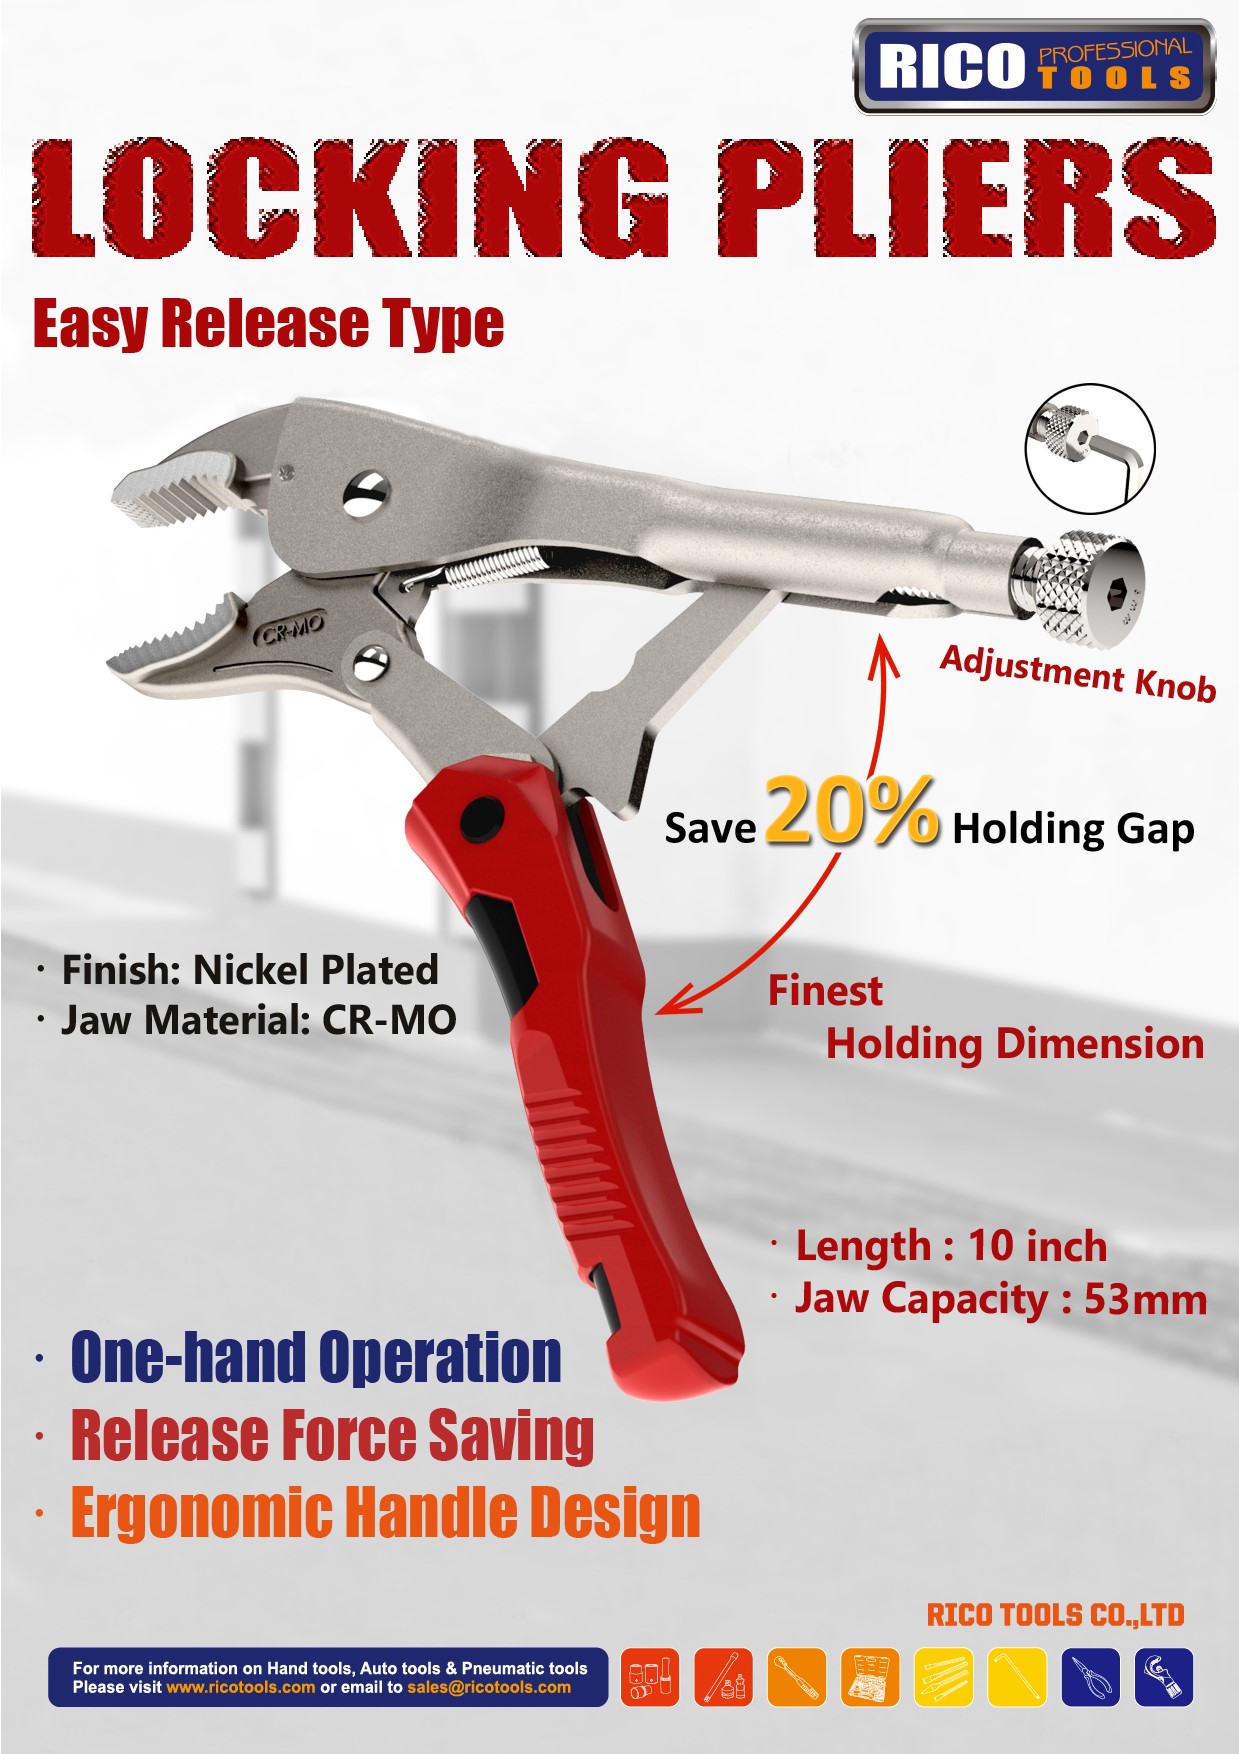 [RICO TOOLS] LOCKING PLIERS - Easy Release Type